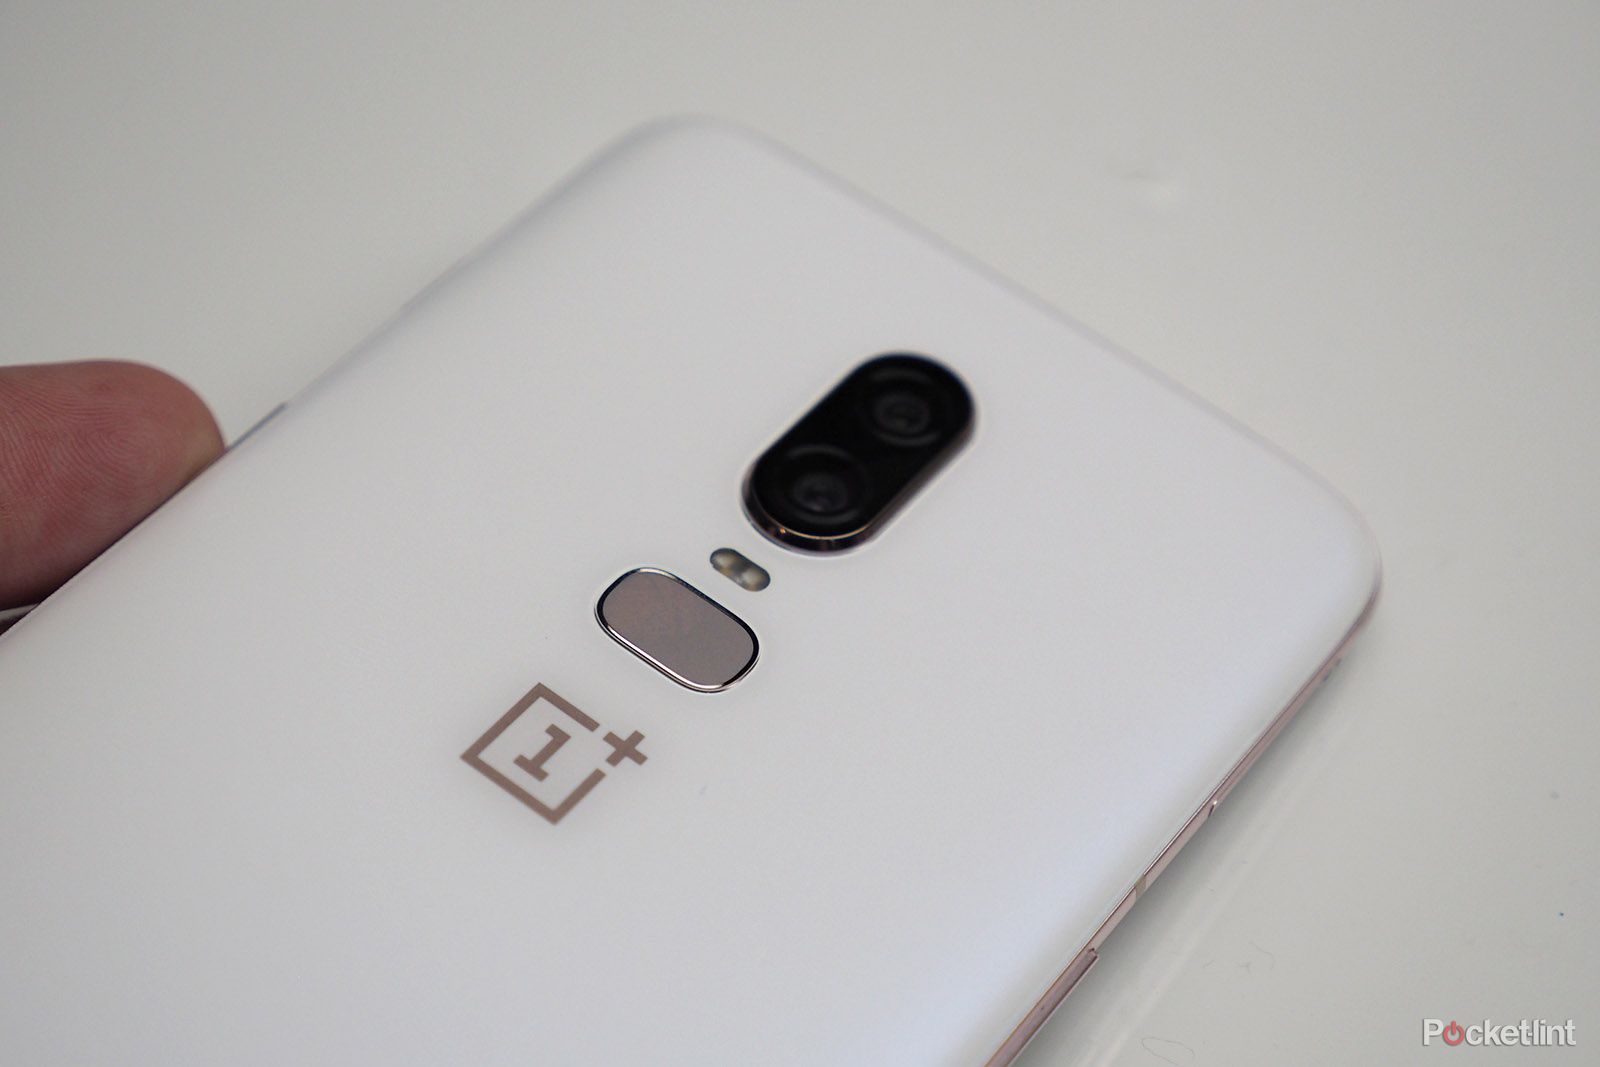 Guess how many OnePlus 6 phones were sold in the past 22 days image 1